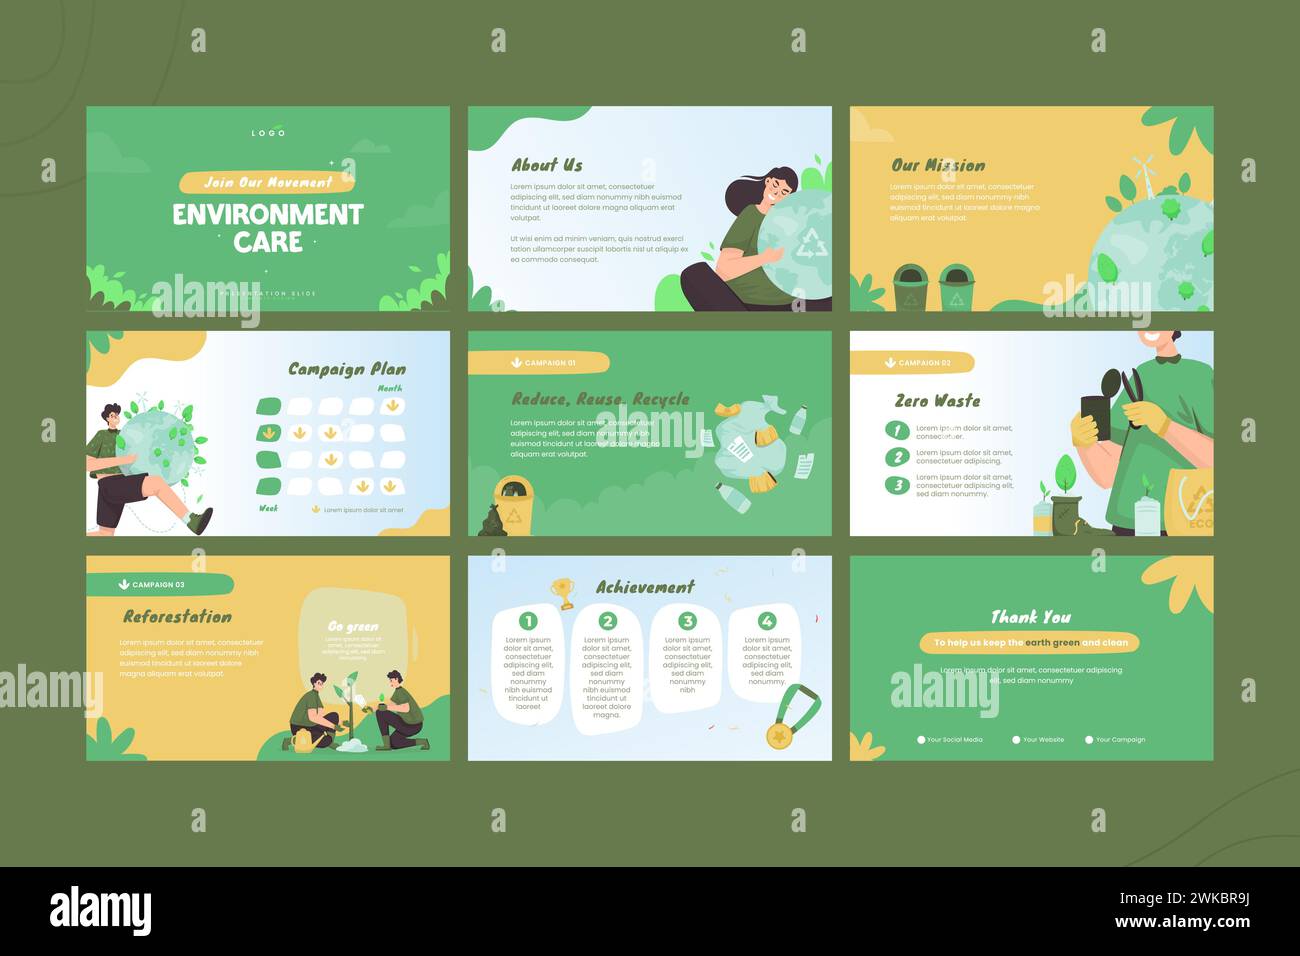 Environment care campaign on presentation slide template Stock Vector